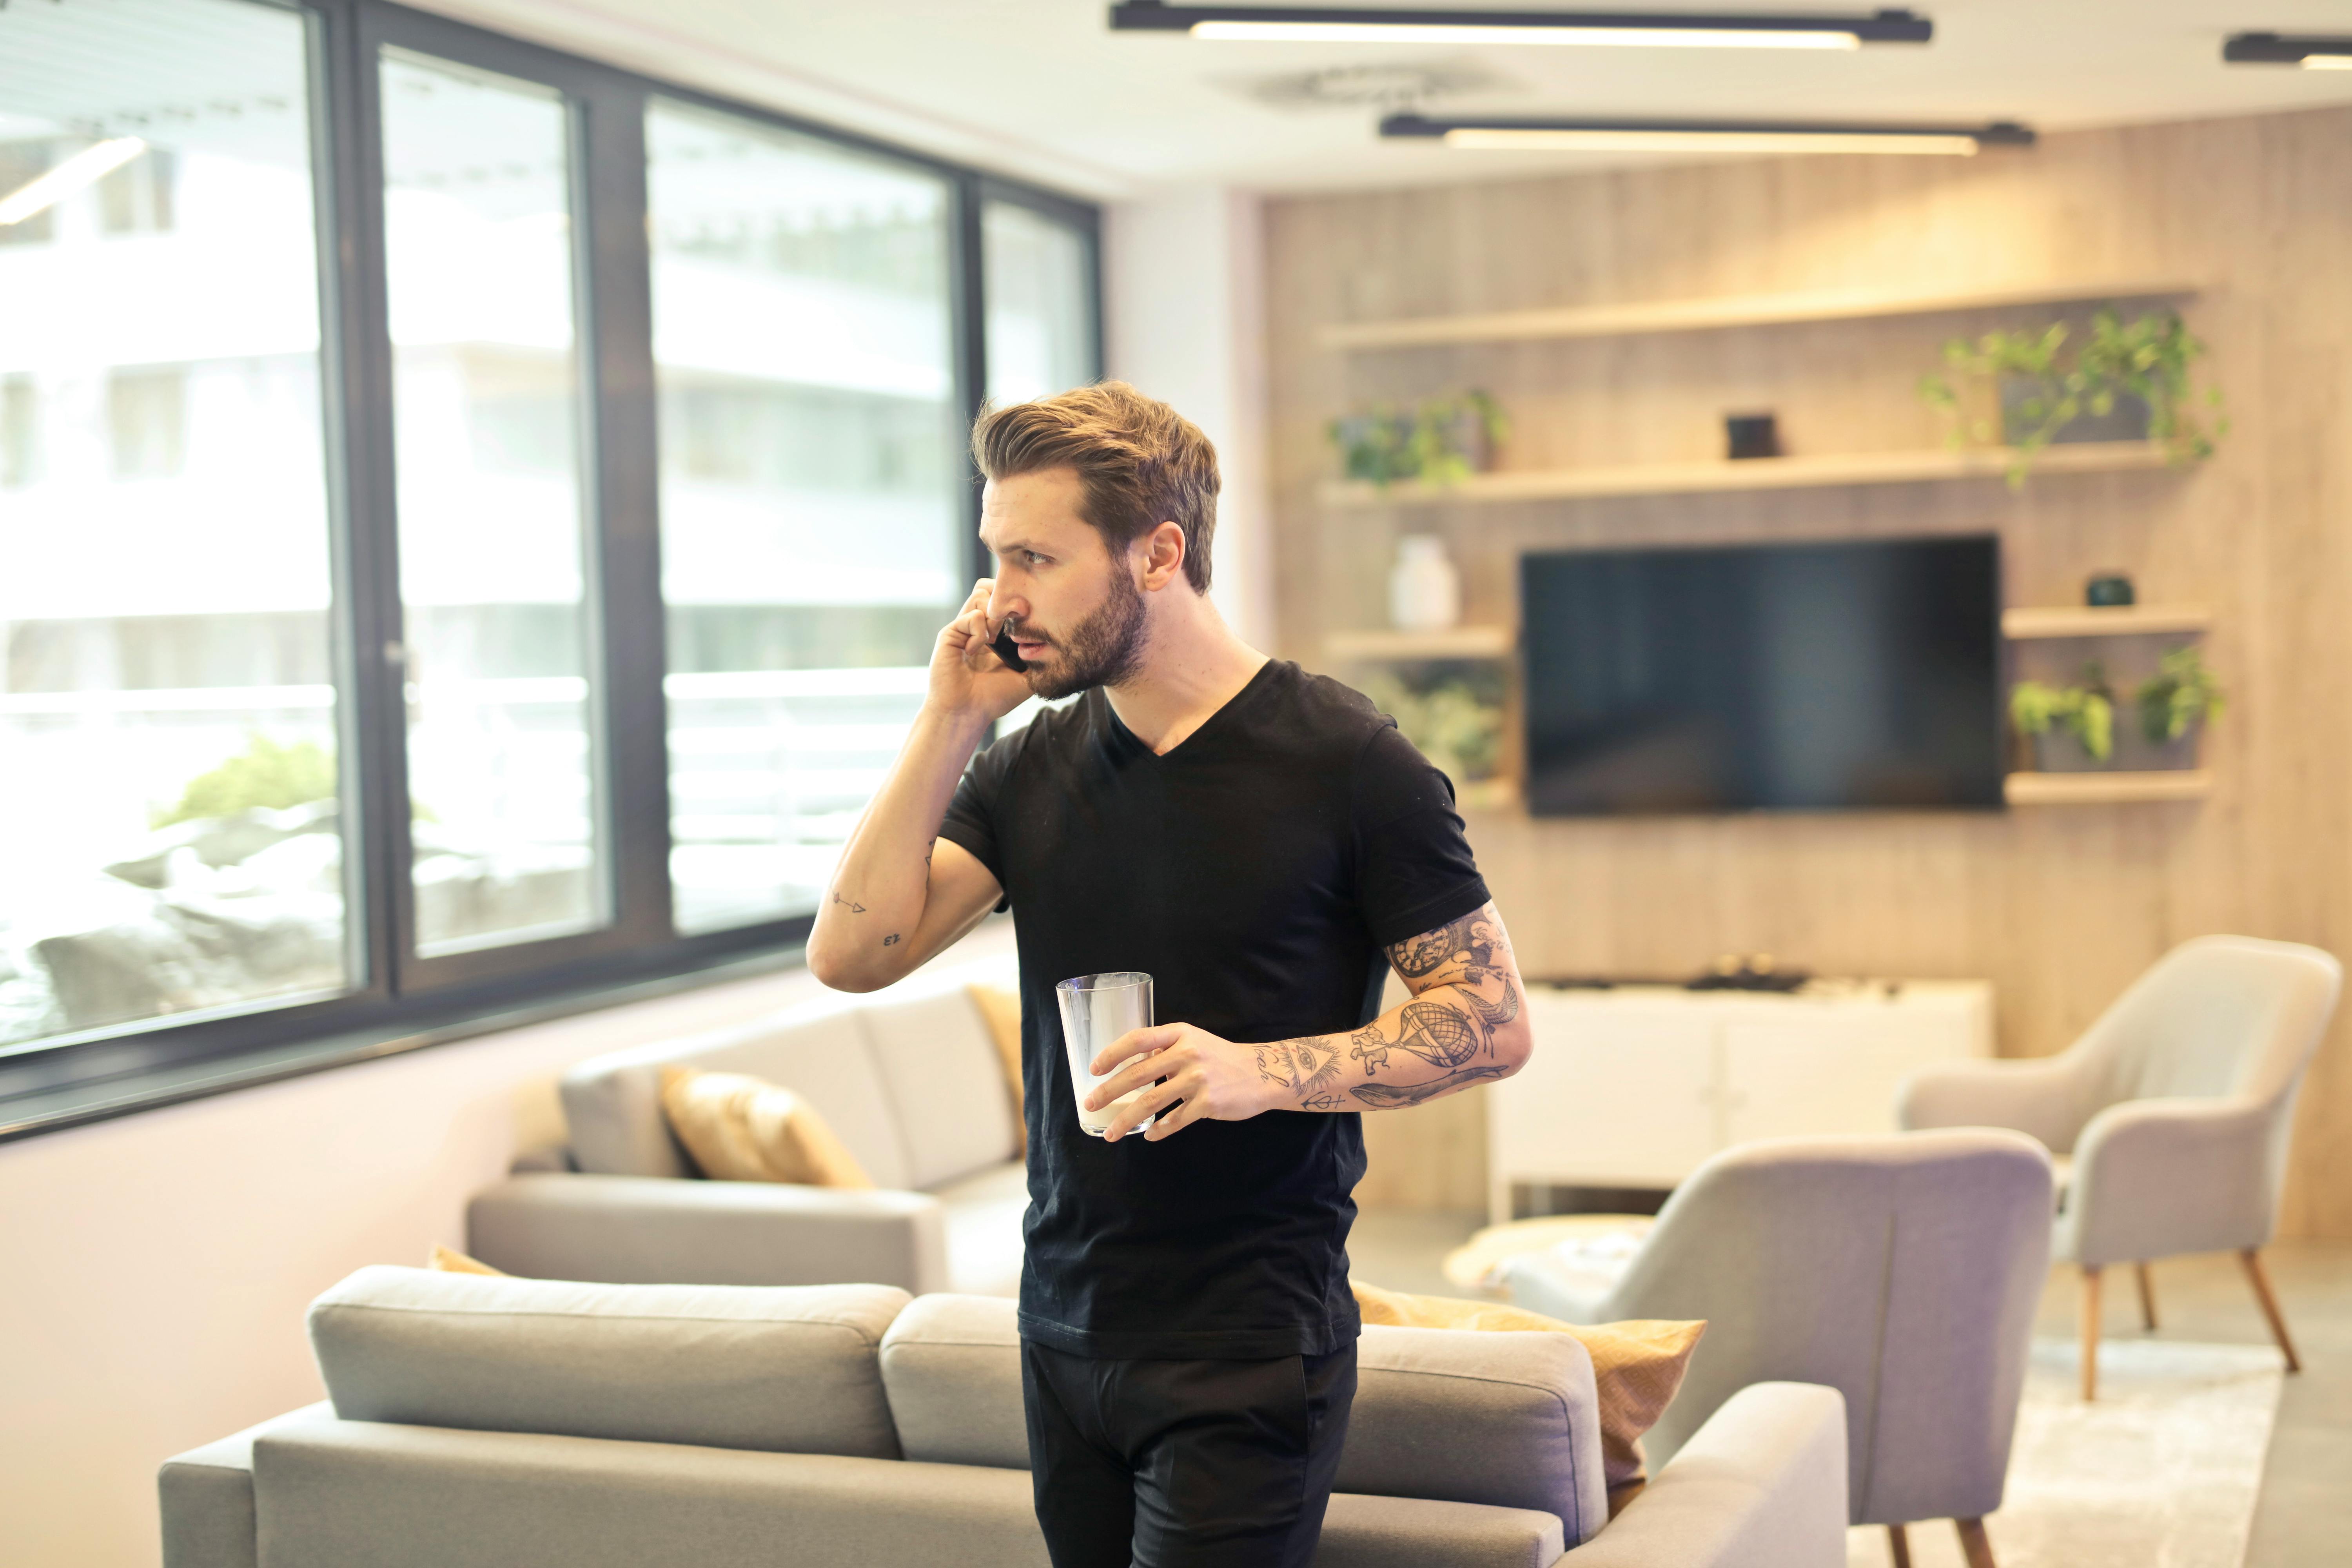 Man talks on the phone in his living room | Source: Pexels